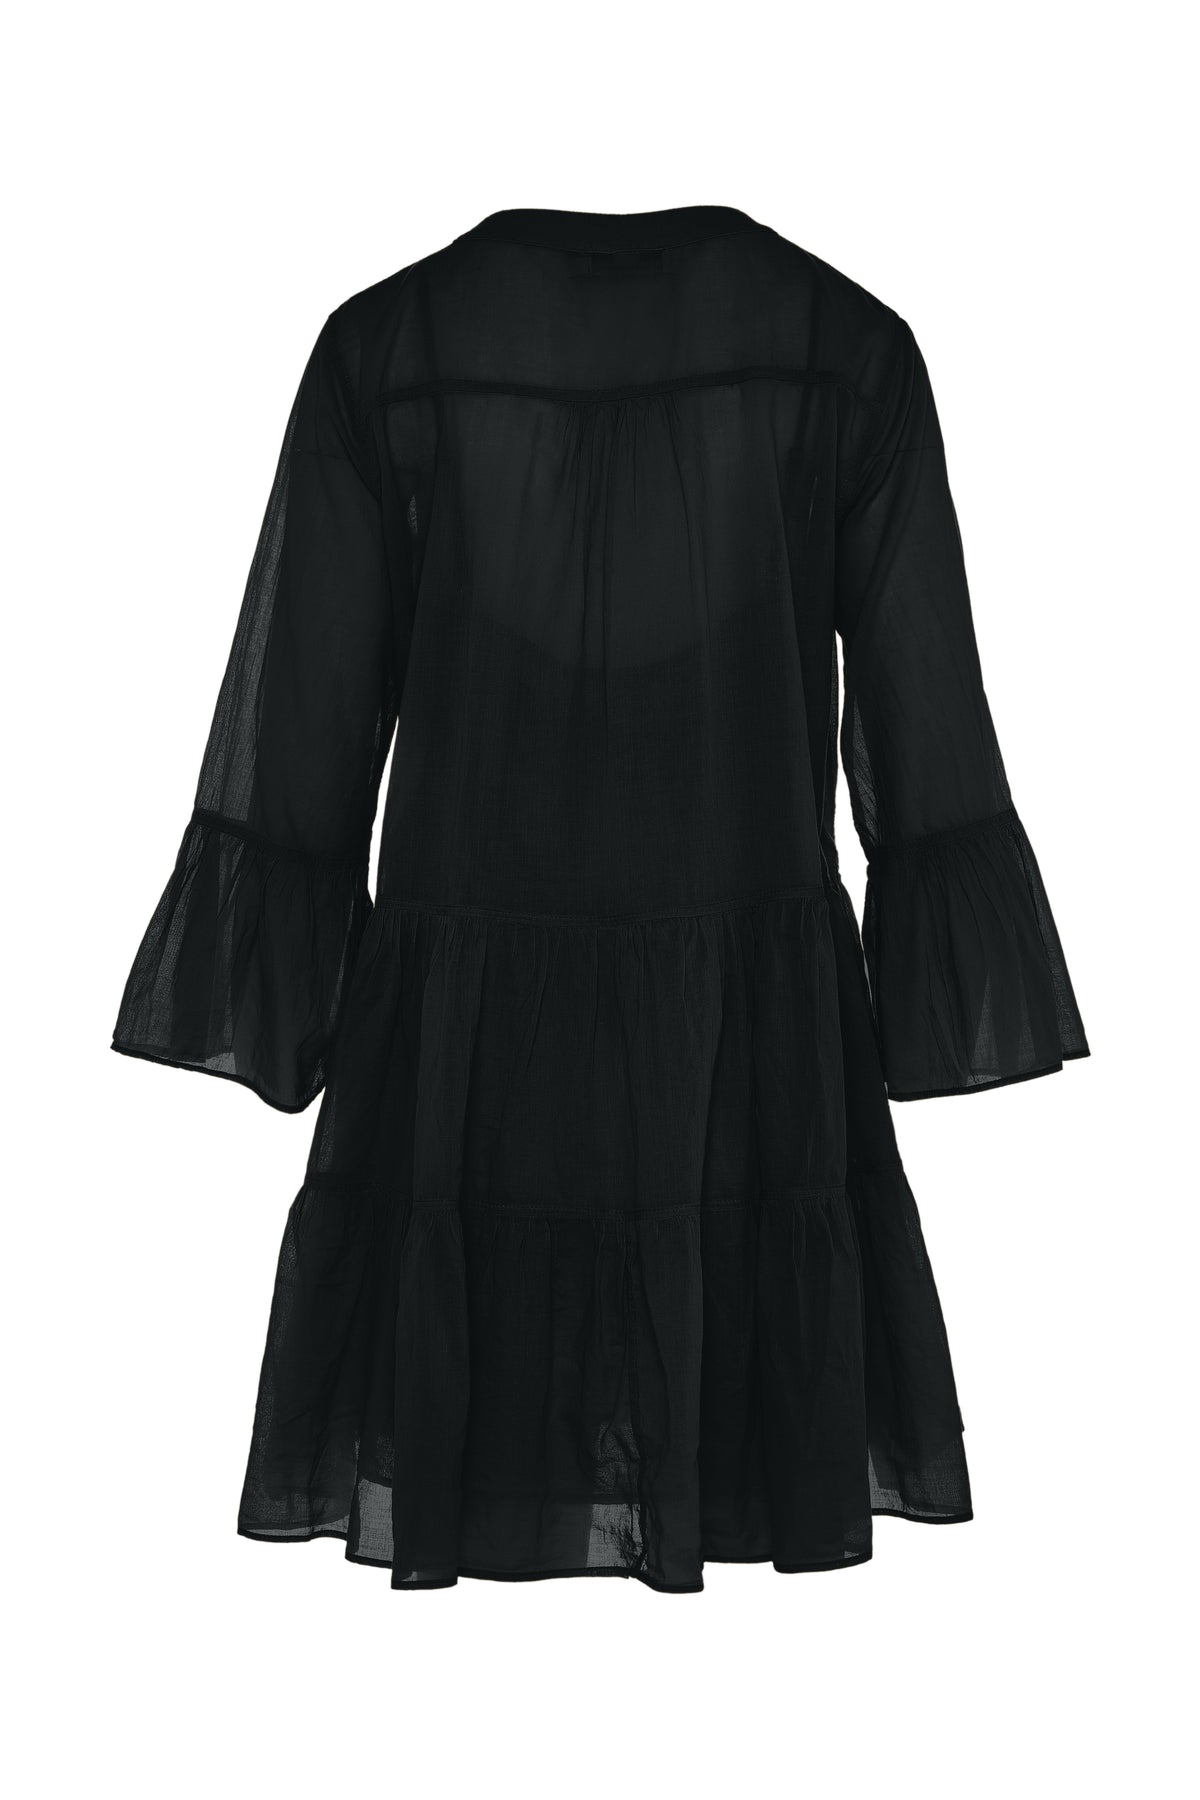 Black knee length lightweight beach dress with long fluted sleeves and tiered skirt with notch neckline